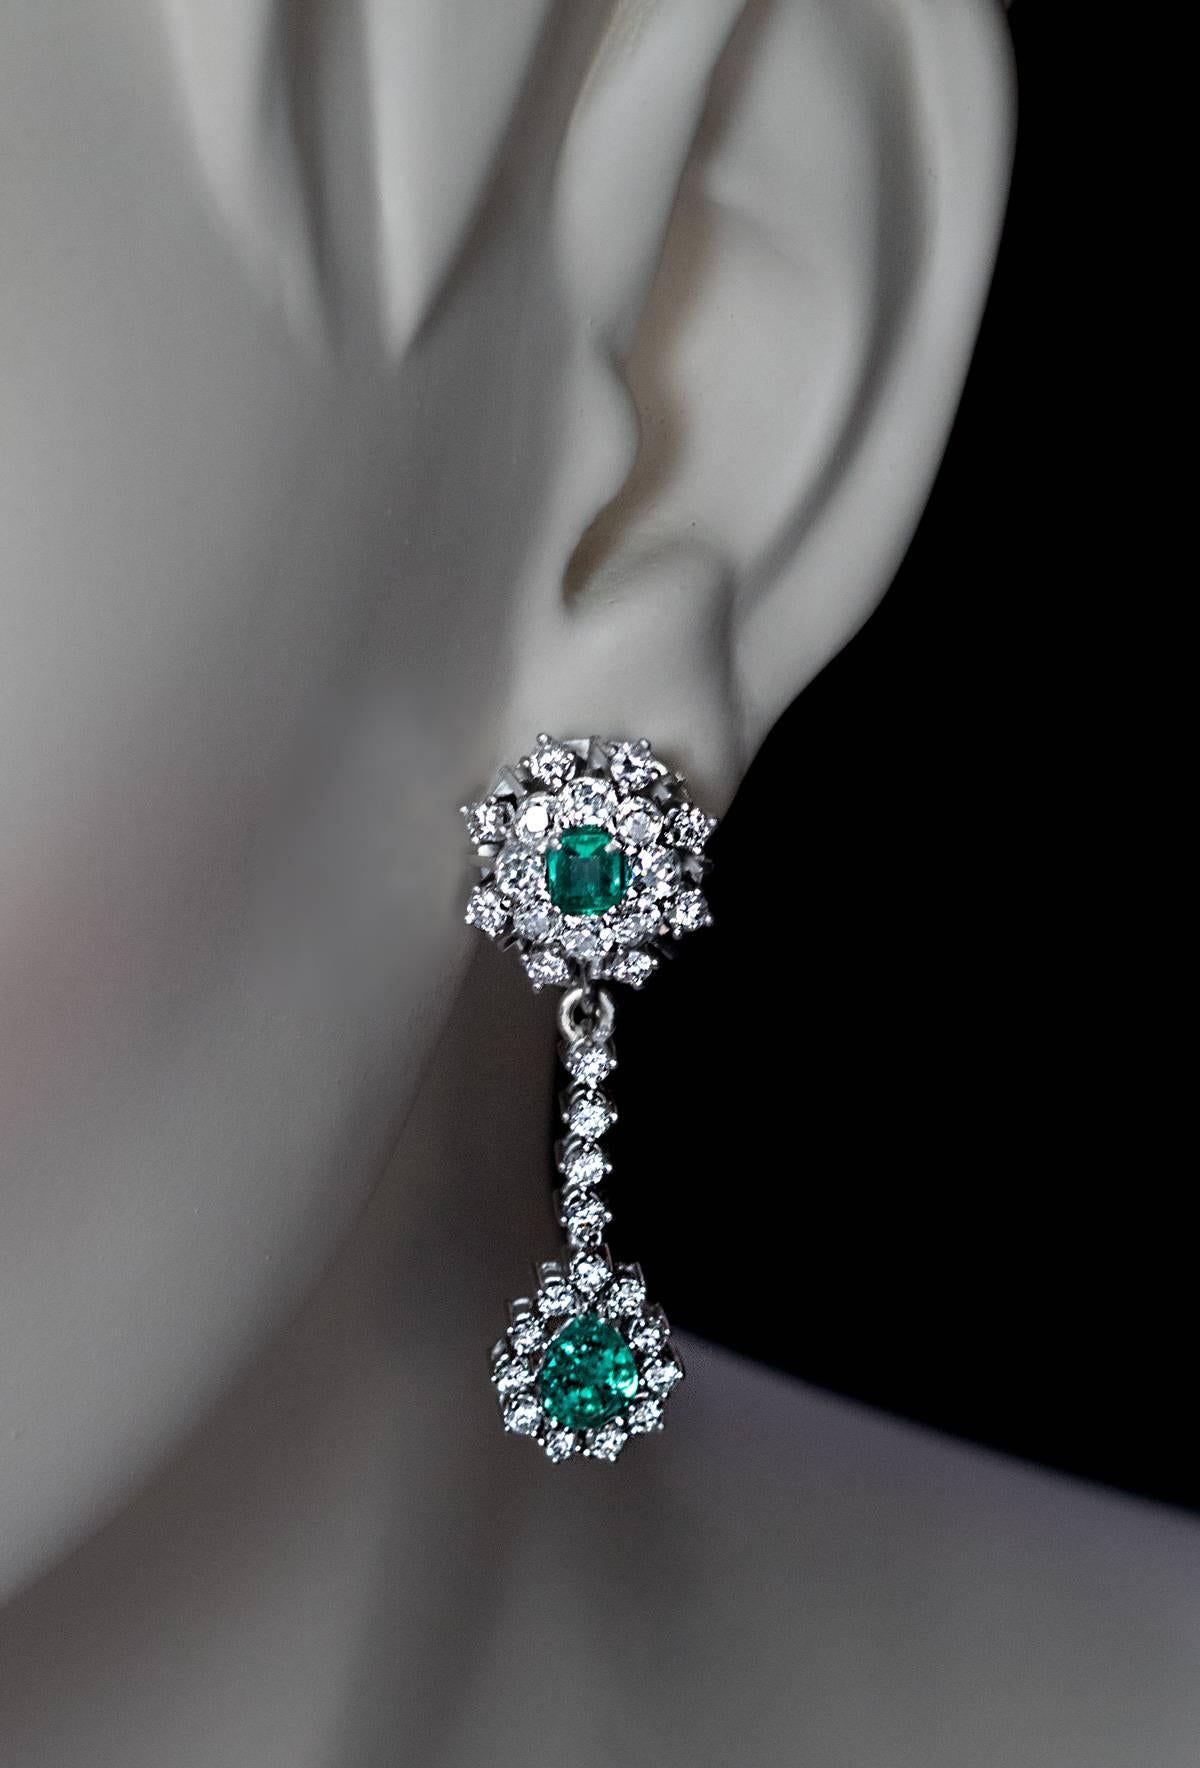 By Austrian maker Anton Heldwein, Vienna, circa 1950s
The earrings are crafted in white 14K gold. The cluster top is designed as stylized snowflake centered with an emerald cut emerald encircled by a row of sparkling old mine cut diamonds and a row